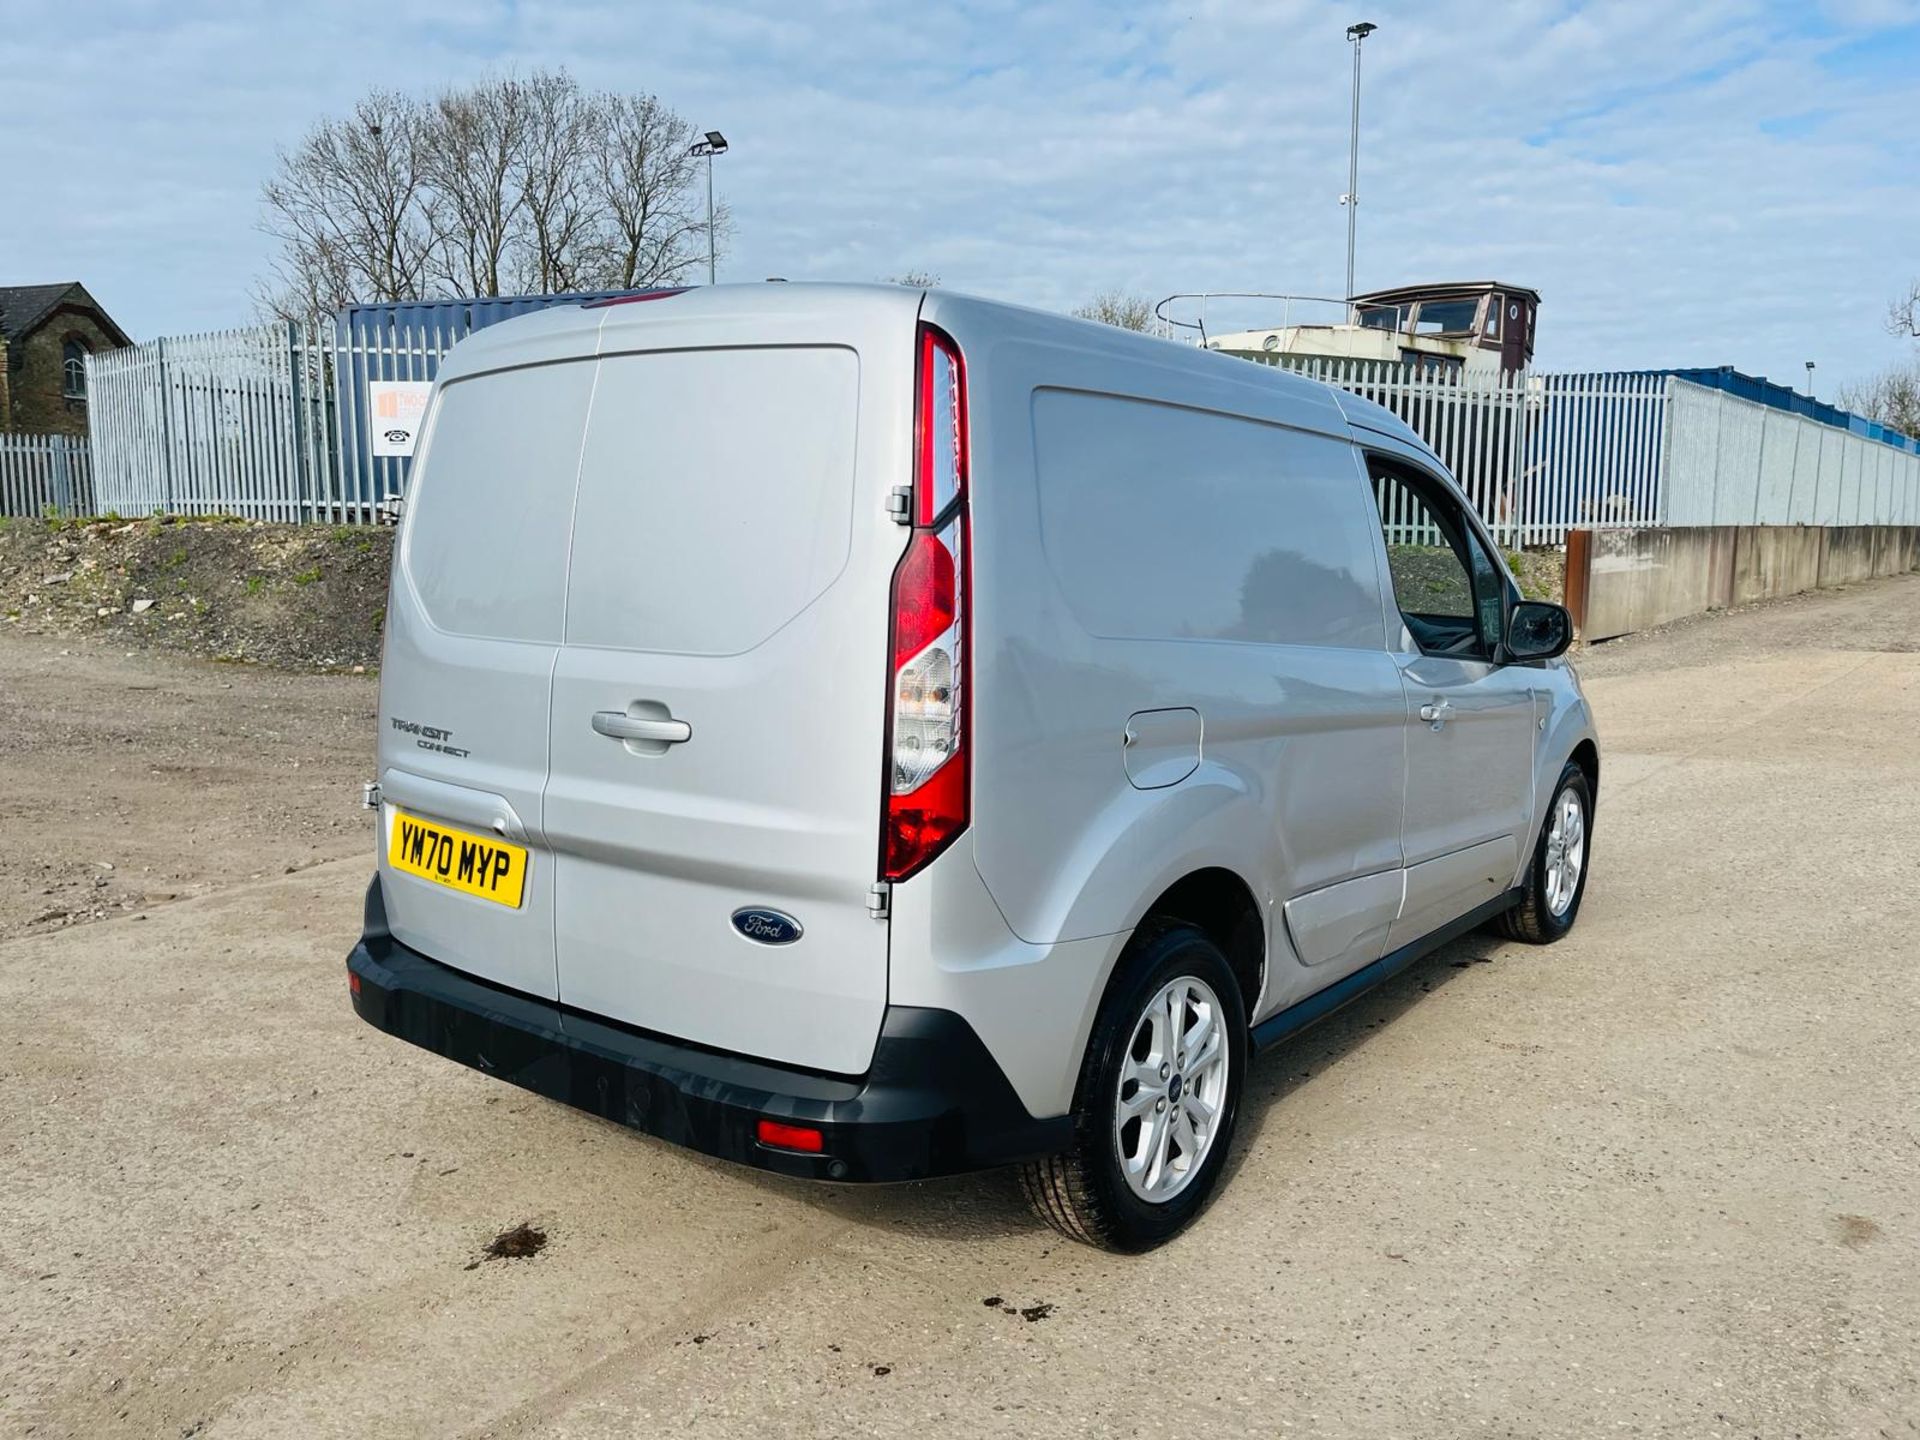 Ford Transit Connect 1.5 TDCI L1H1-2020 '70 Reg'- 1 Previous Owner -Alloy Wheels -Sat Nav - A/C - Image 12 of 28